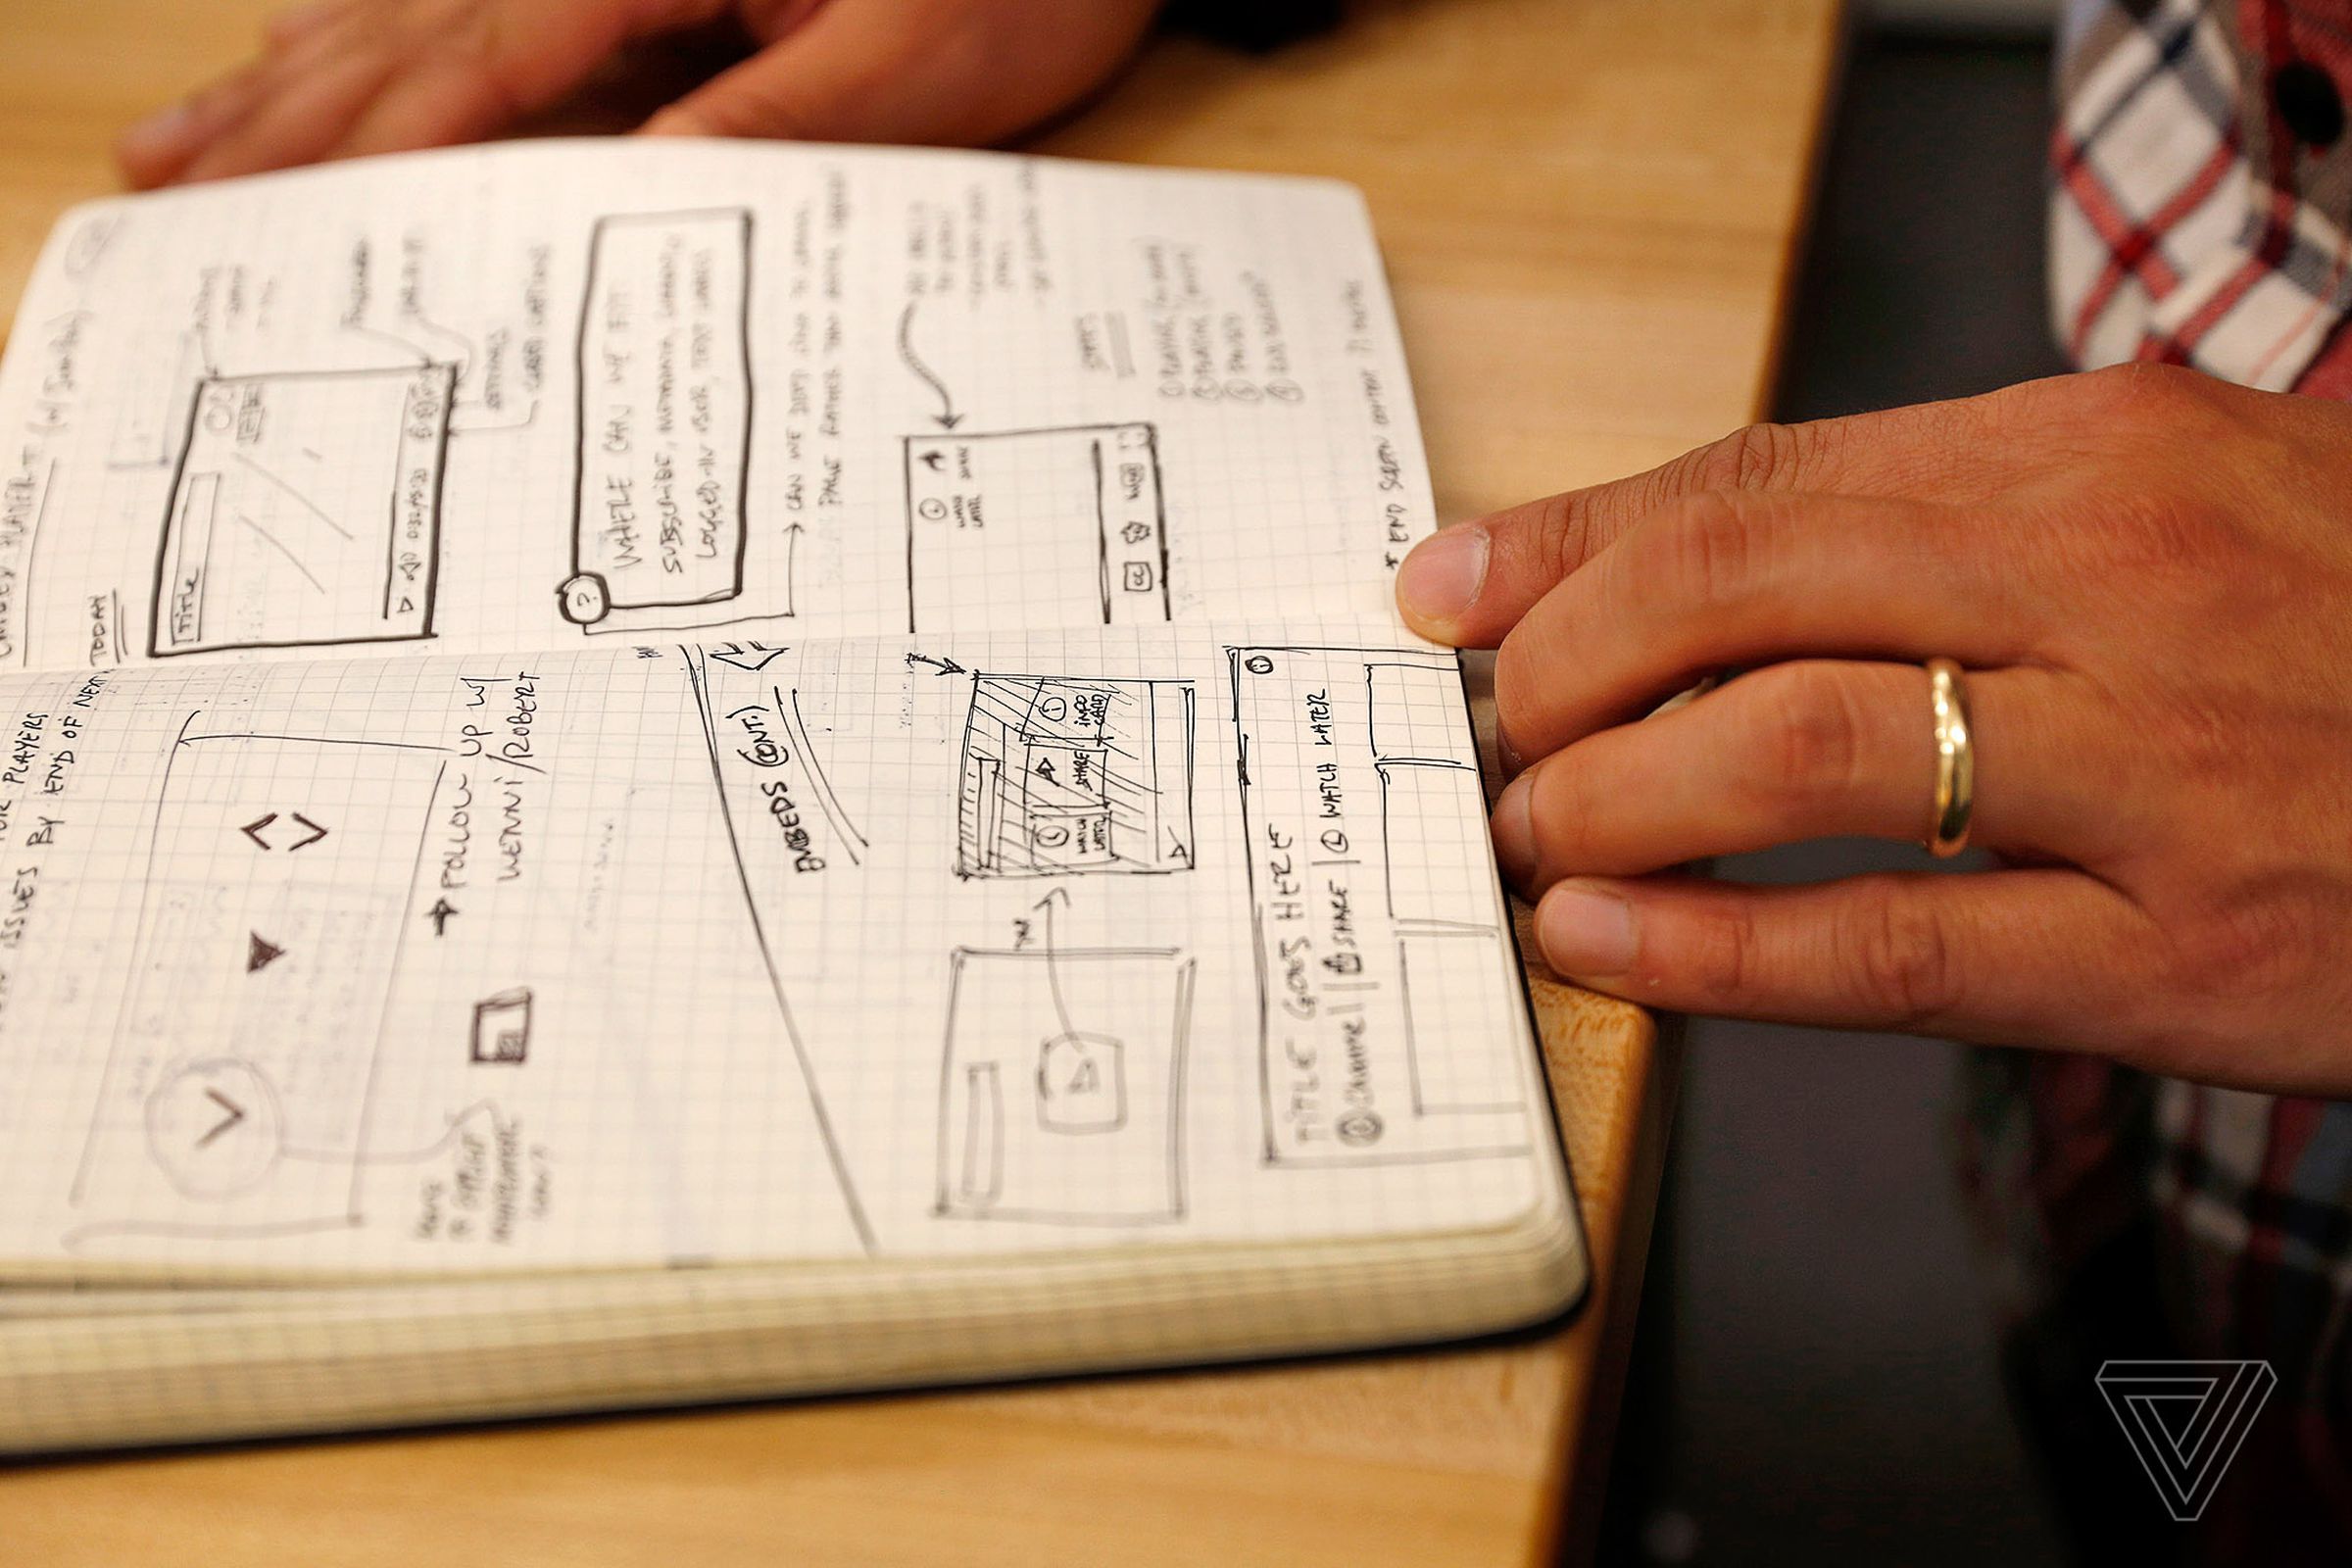 Robert Thompson, a lead designer at YouTube, shows off a notebook of ideas.